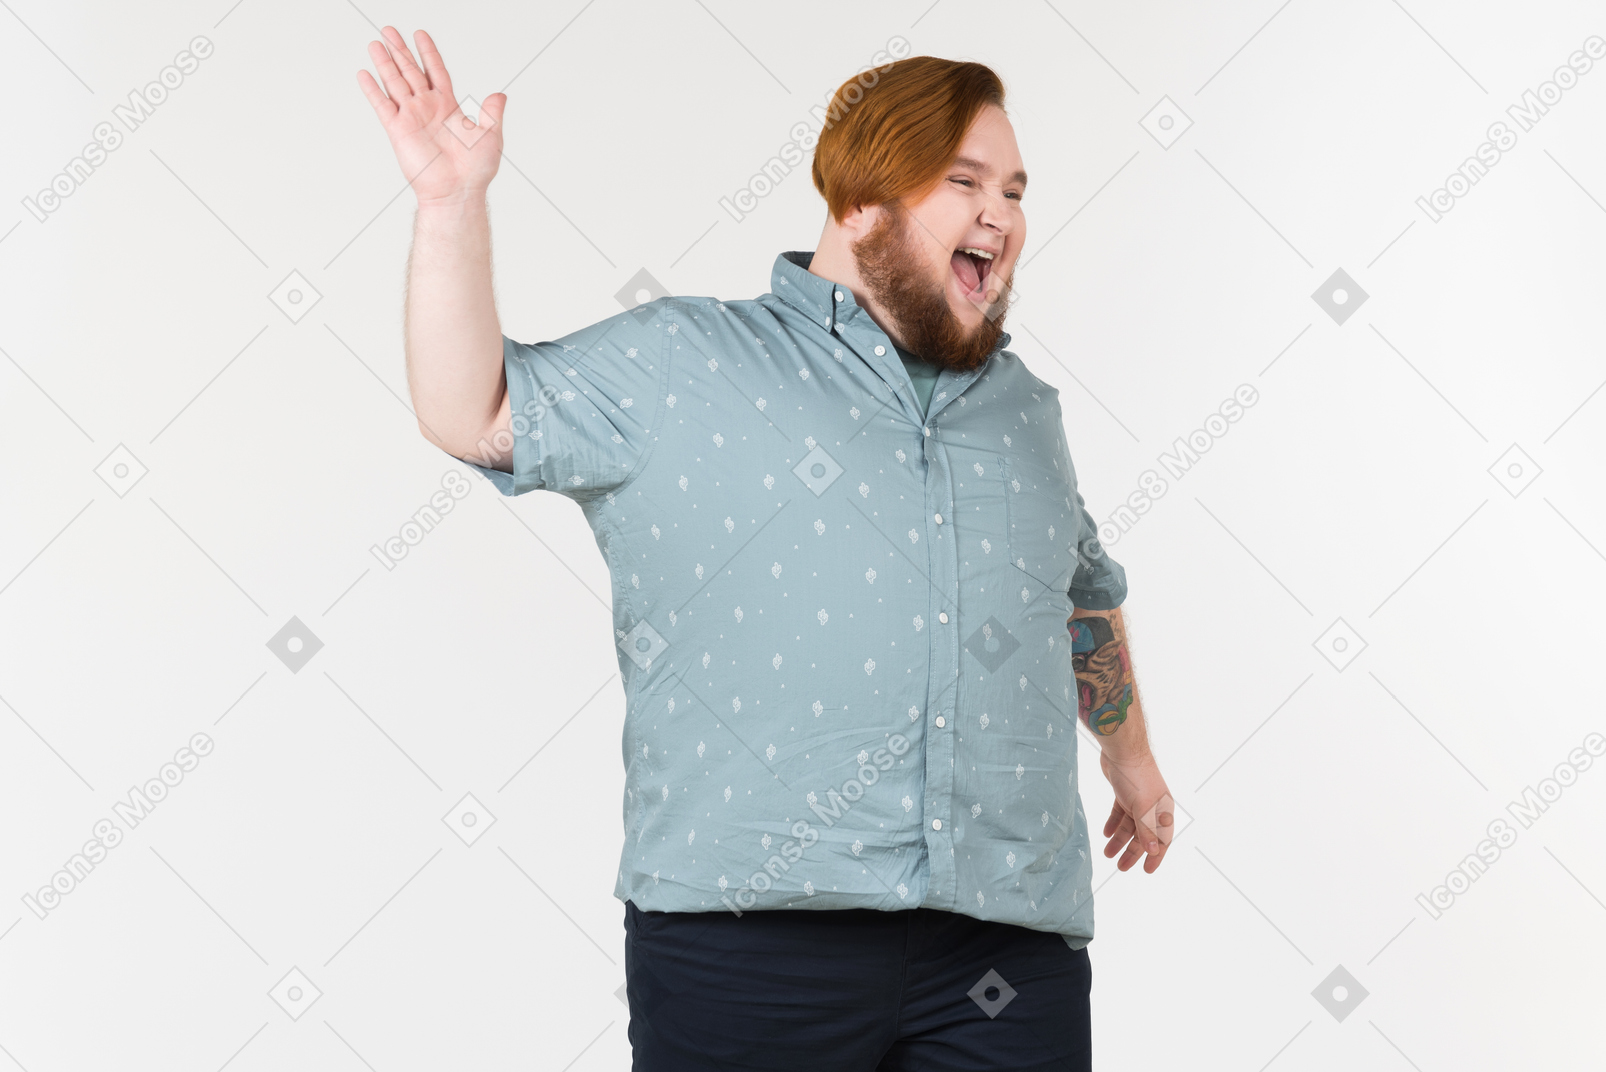 A plump man standing with his hands on his hips and laughing